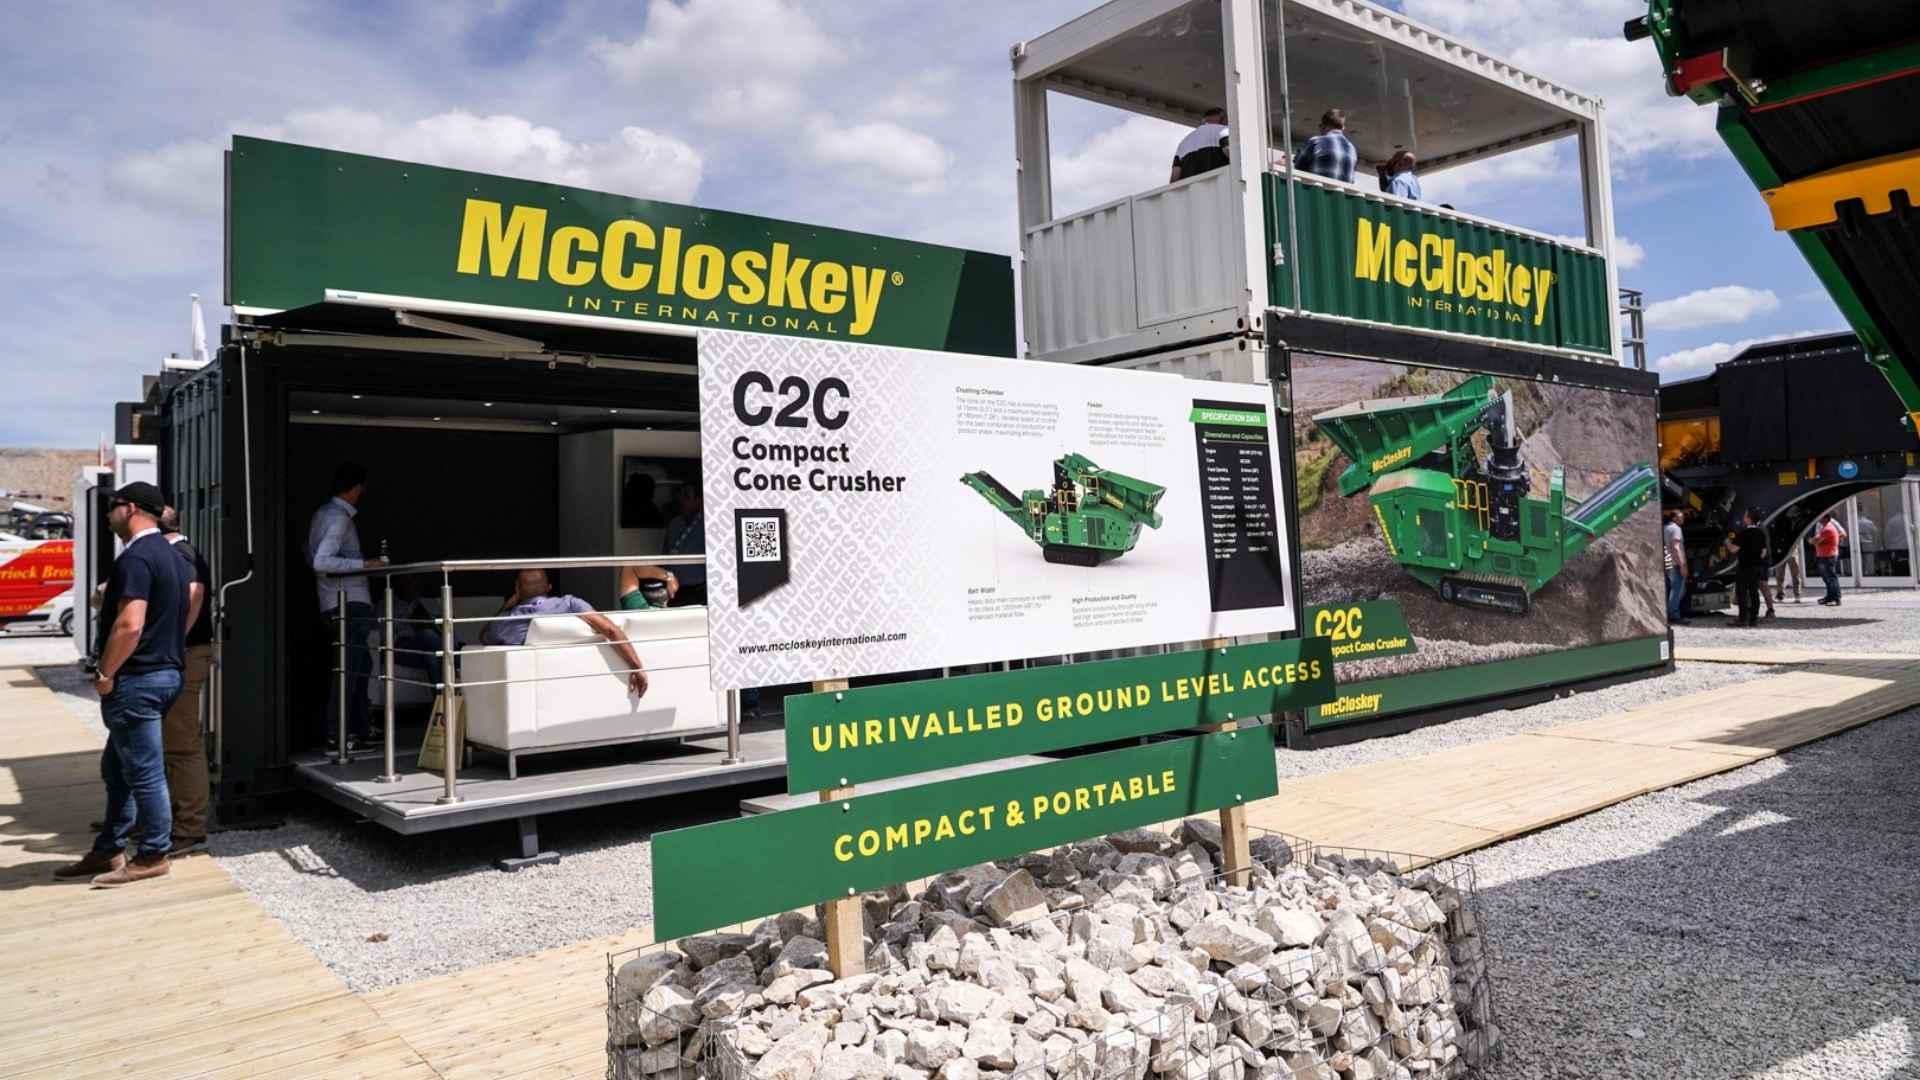 mccloskey product demonstration exhibition